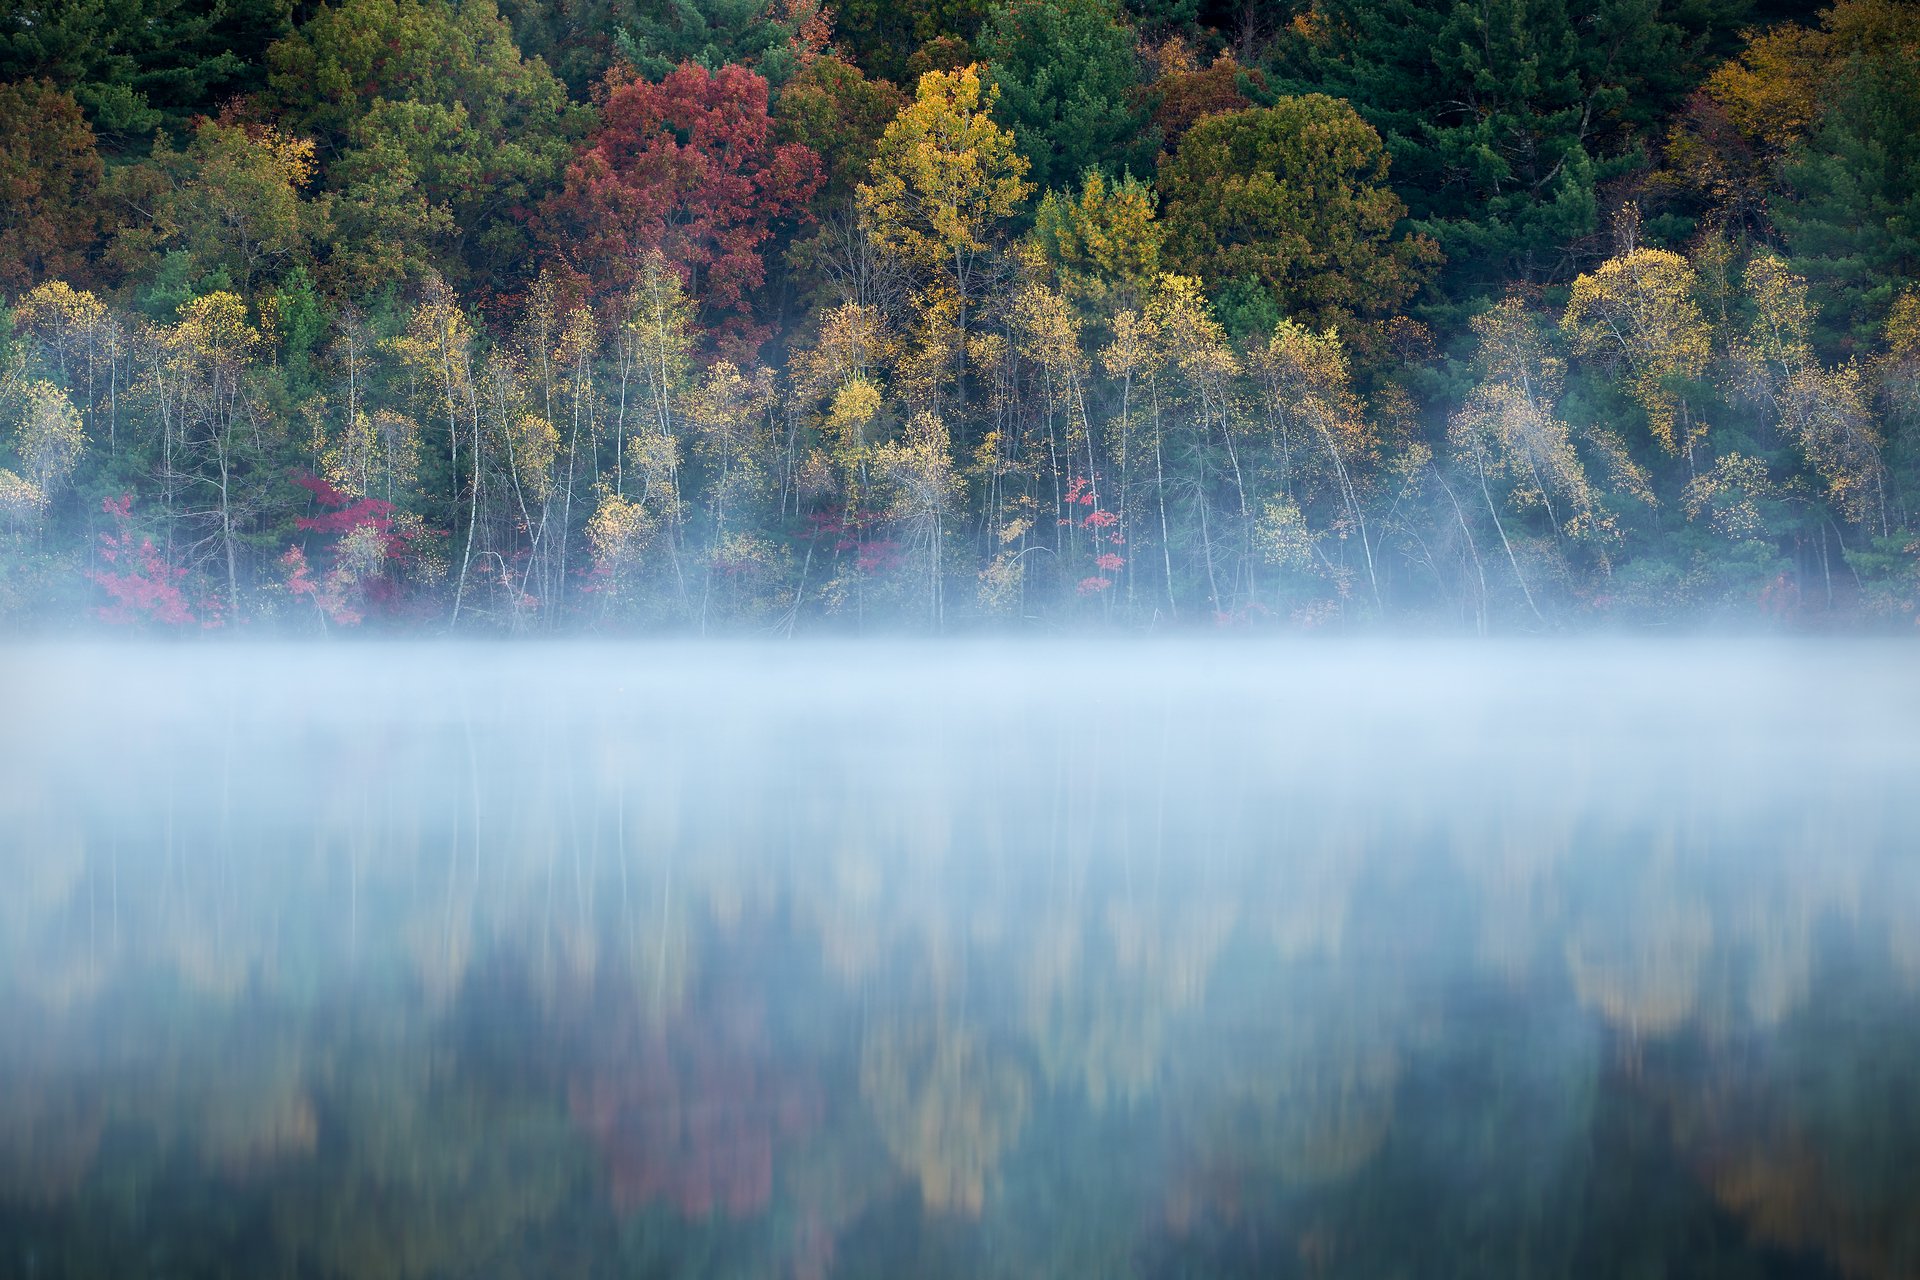 A calm lake with fog blurring the line between the water and the forest. Trees are shade of yellow, green, and red.